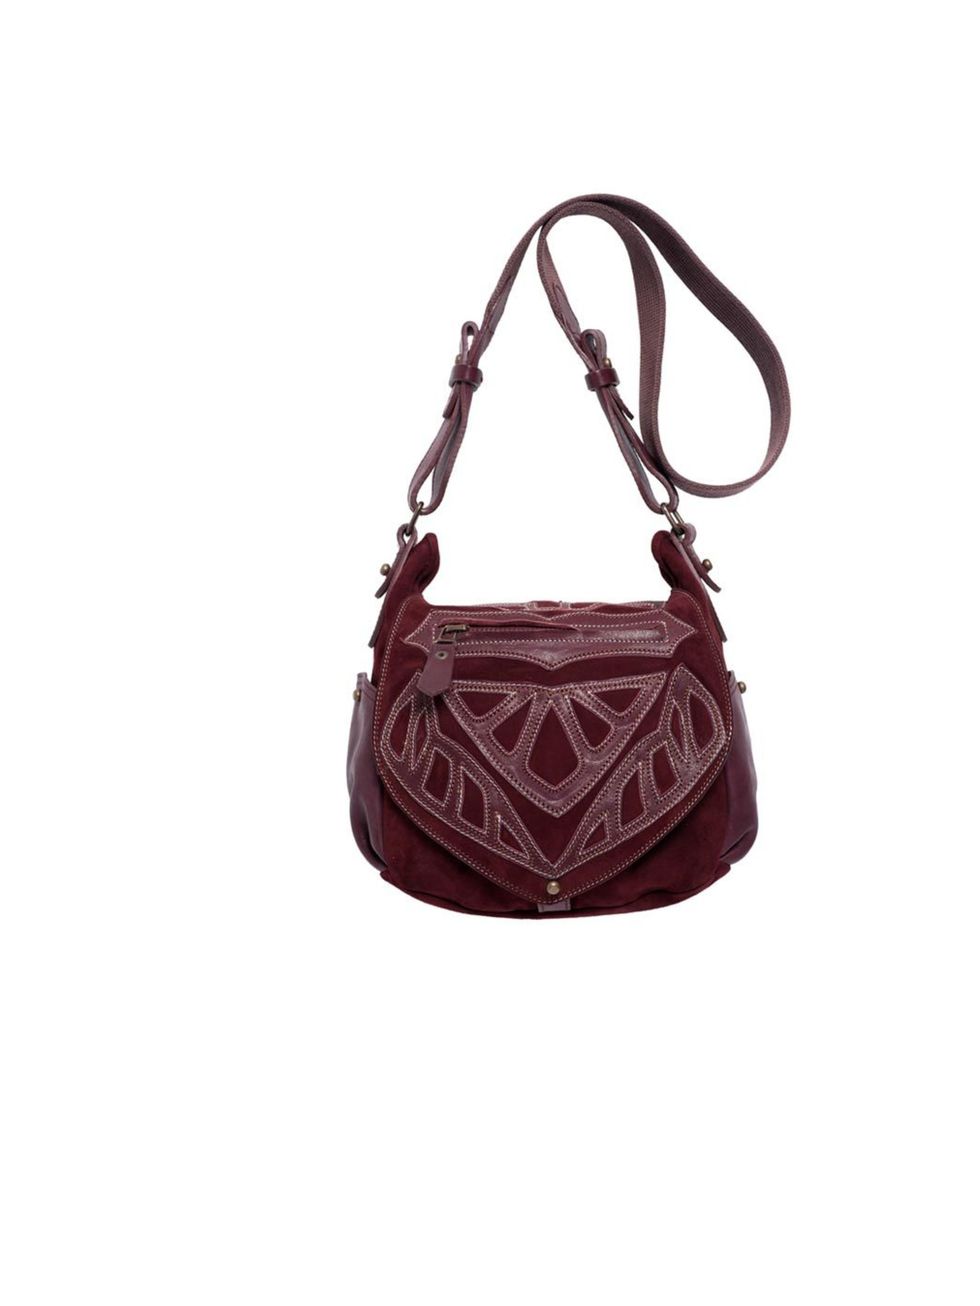 <p>Isabel Marant embroidered bag, £630, Available from Selfridges, for stockists call 0800 123 400</p>